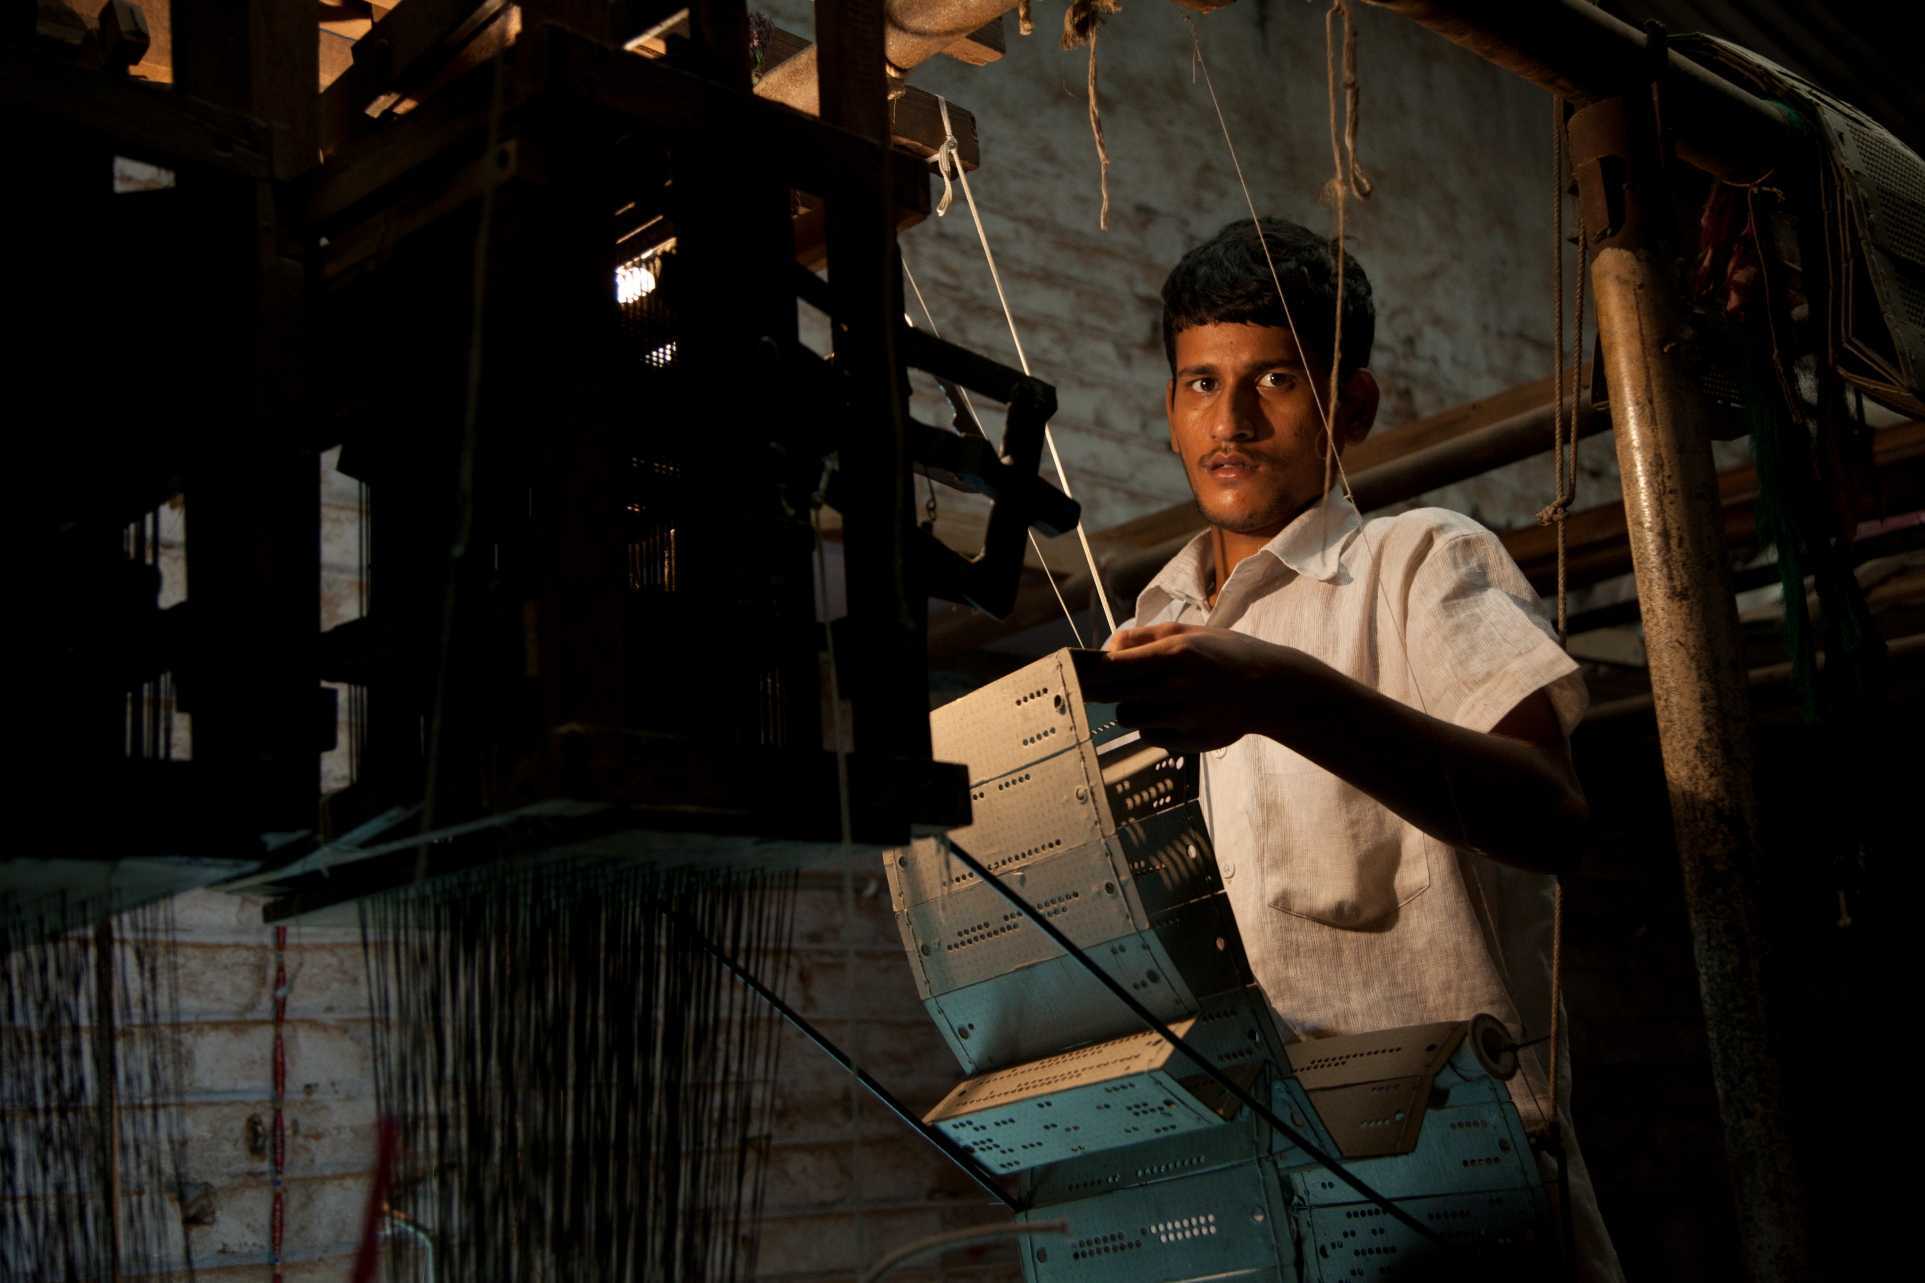 The artisans who work at the Royal Brocades loom in Gujarat weave according to the jacquard technique.